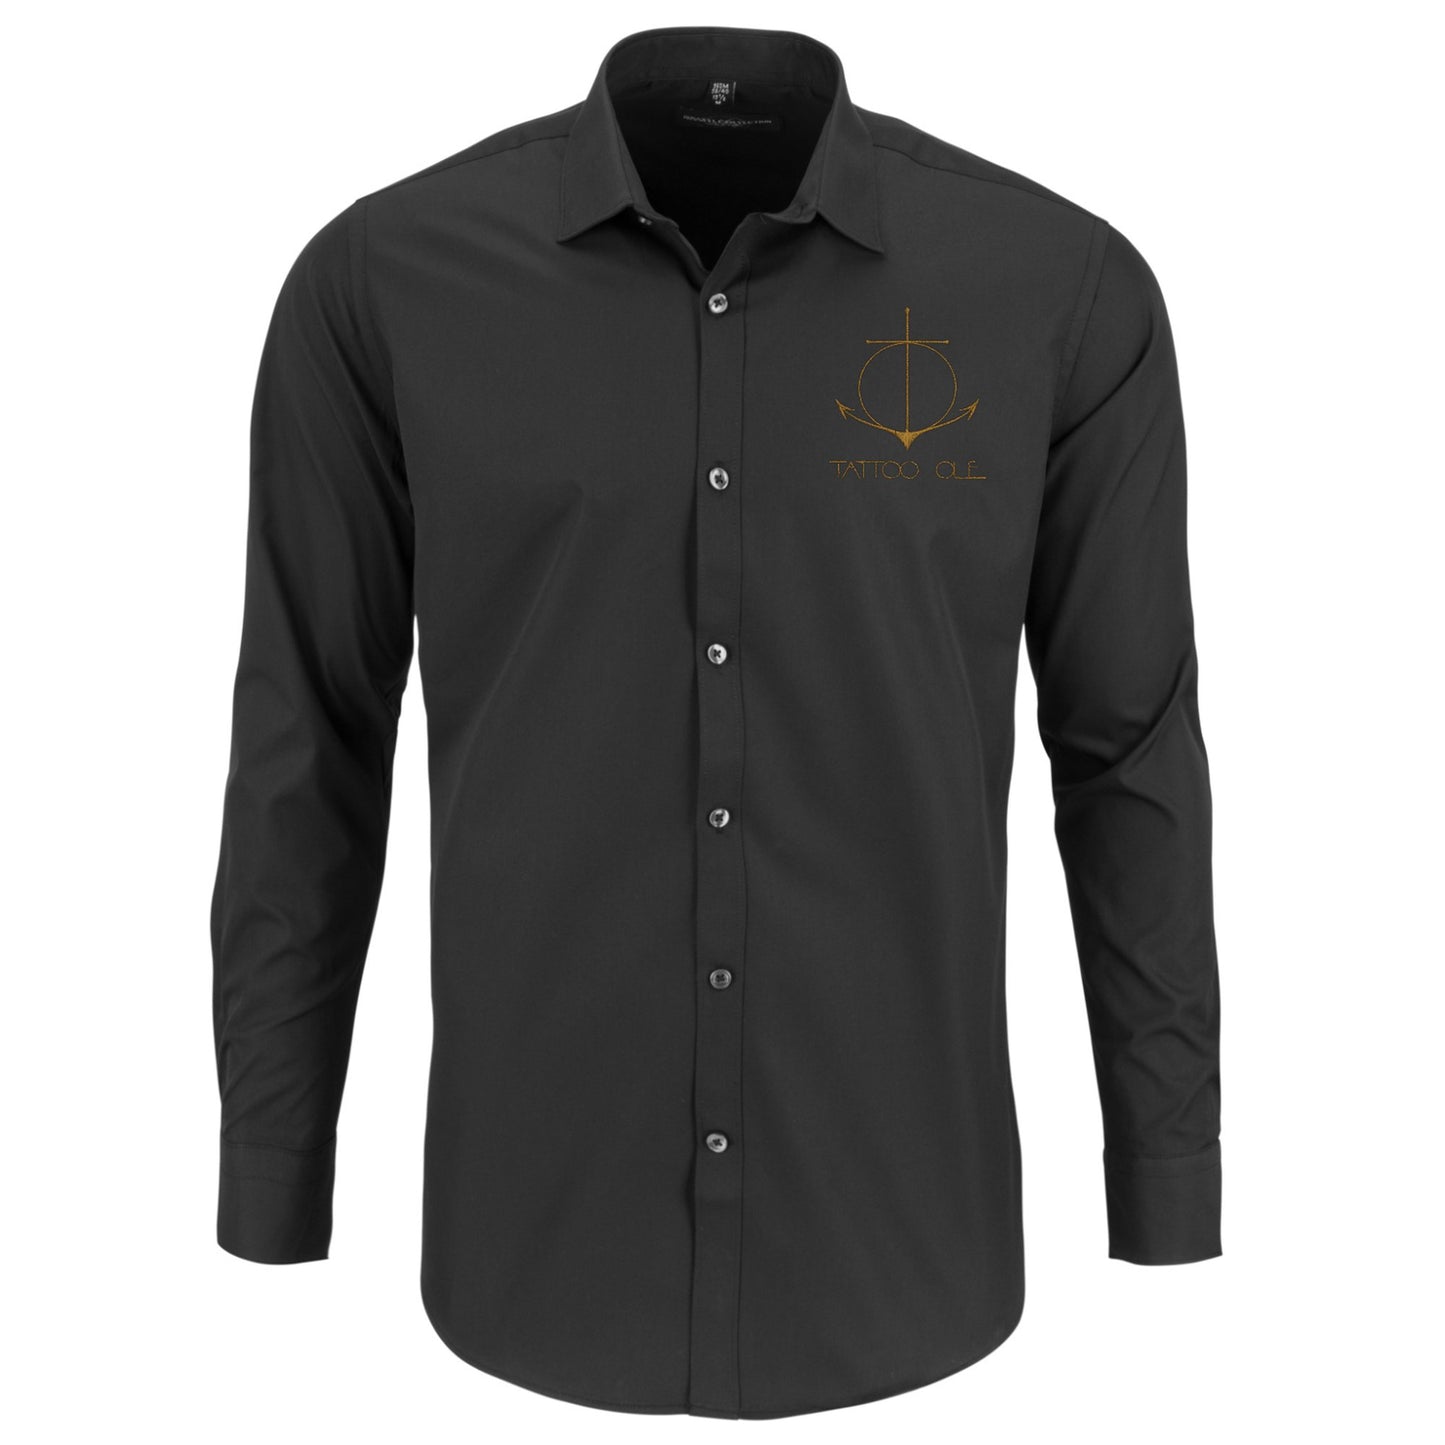 Tattoo Ole slim fit exclusive shirt black with anchor